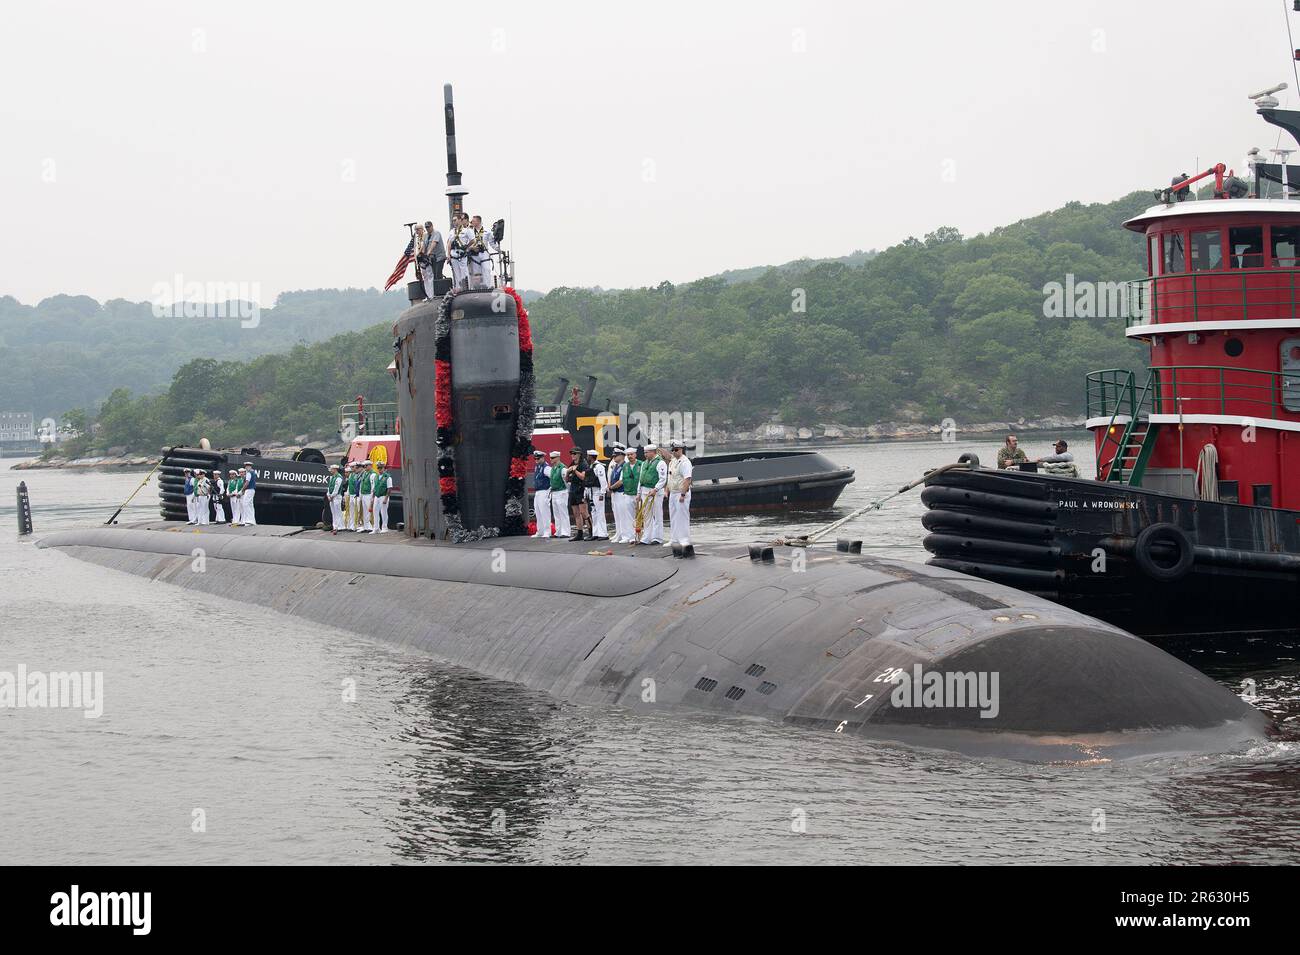 https://c8.alamy.com/comp/2R630H5/uss-san-juan-ssn-751-returned-home-to-submarine-base-new-london-in-groton-conn-on-tuesday-june-6-2023-following-a-regularly-scheduled-deployment-the-los-angeles-class-submarine-which-operates-under-submarine-squadron-12-is-the-third-united-states-ship-to-be-named-san-juan-and-was-commissioned-on-aug-6-1988-us-navy-photo-by-john-narewski-2R630H5.jpg